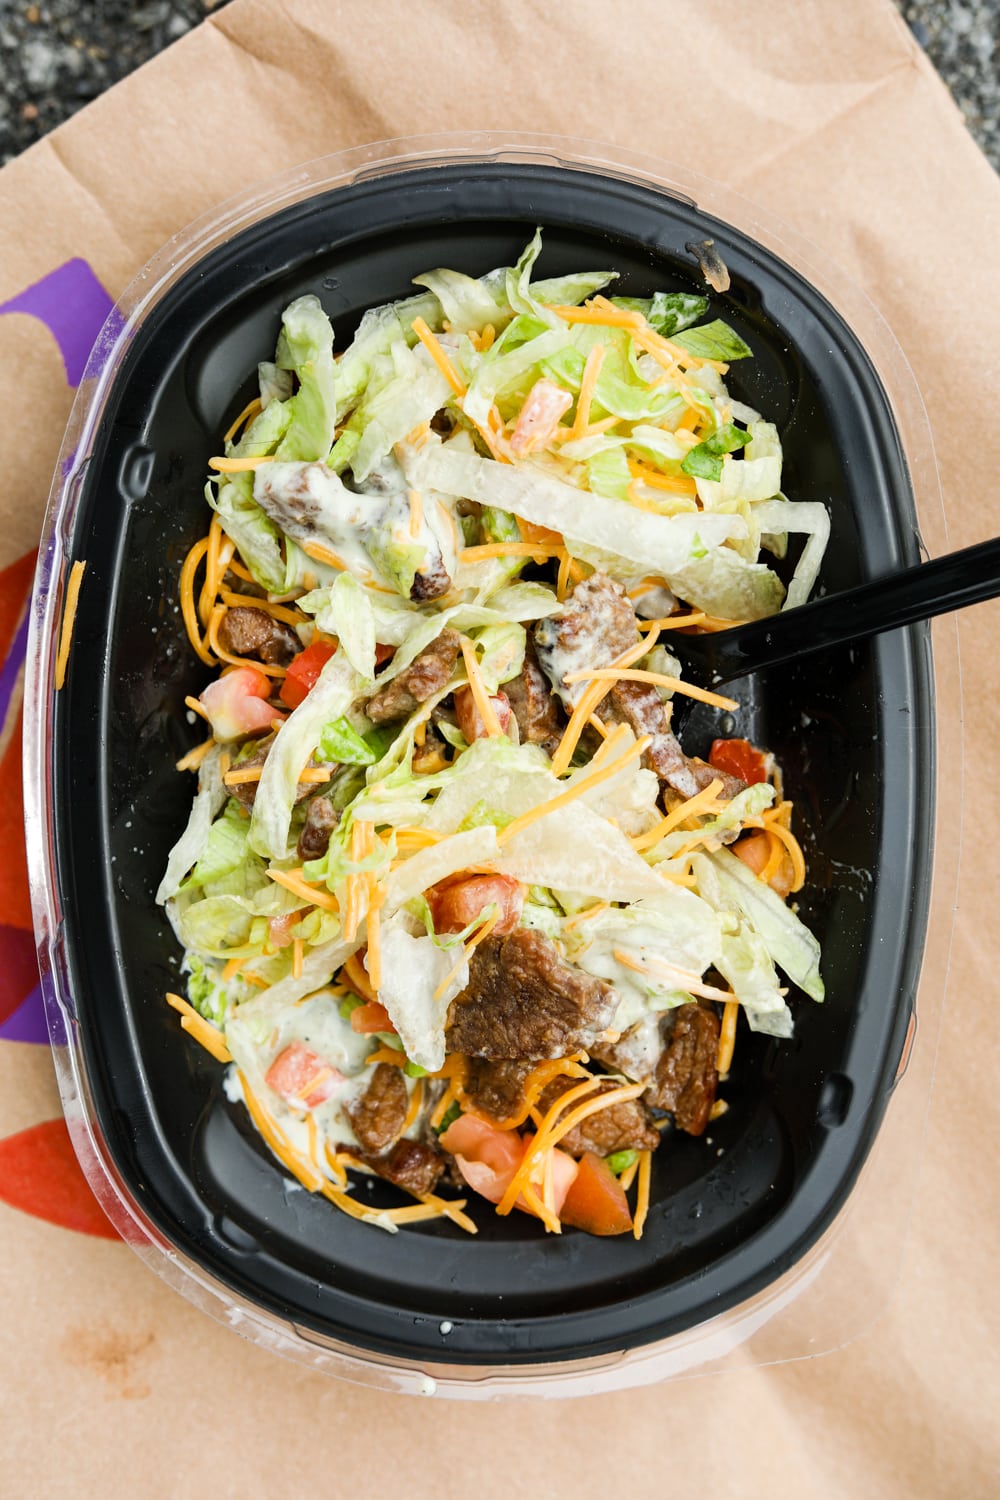 A bowl full of shredded lettuce, cheese, pico de gallo, and thin strips of steak.